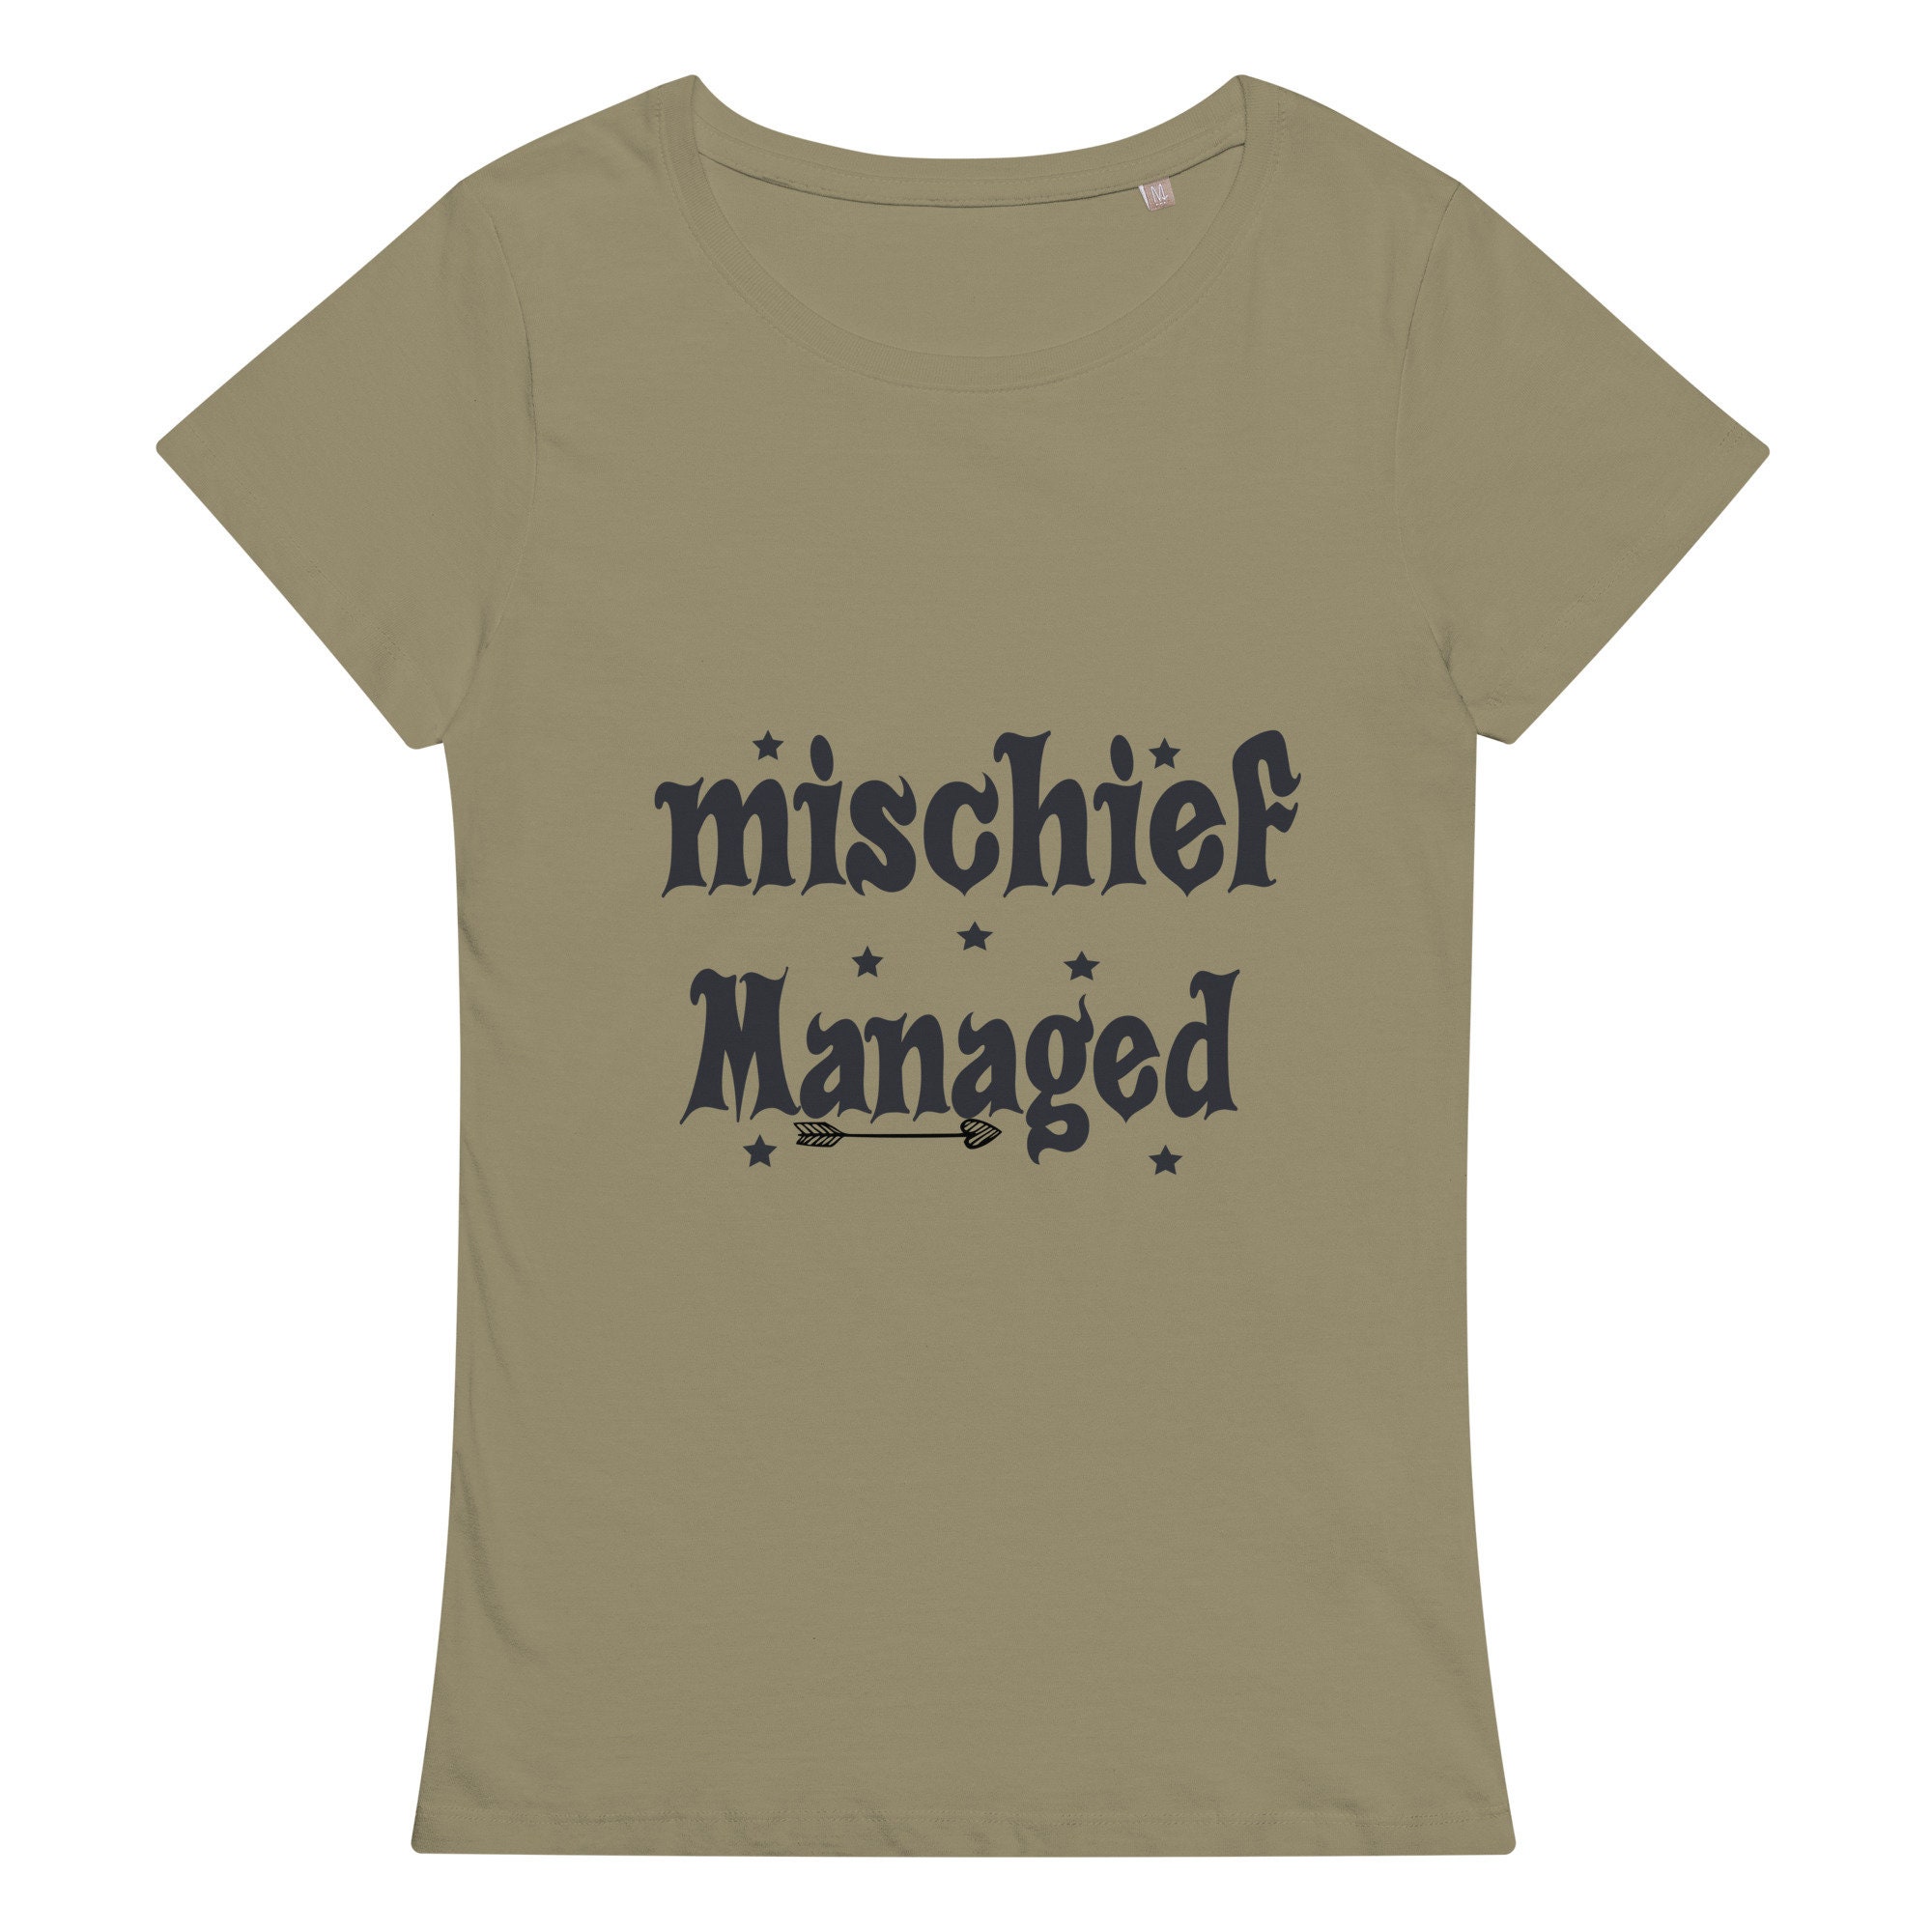 Mischief Managed Symbol Design t-shirt fitted short sleeve womens 